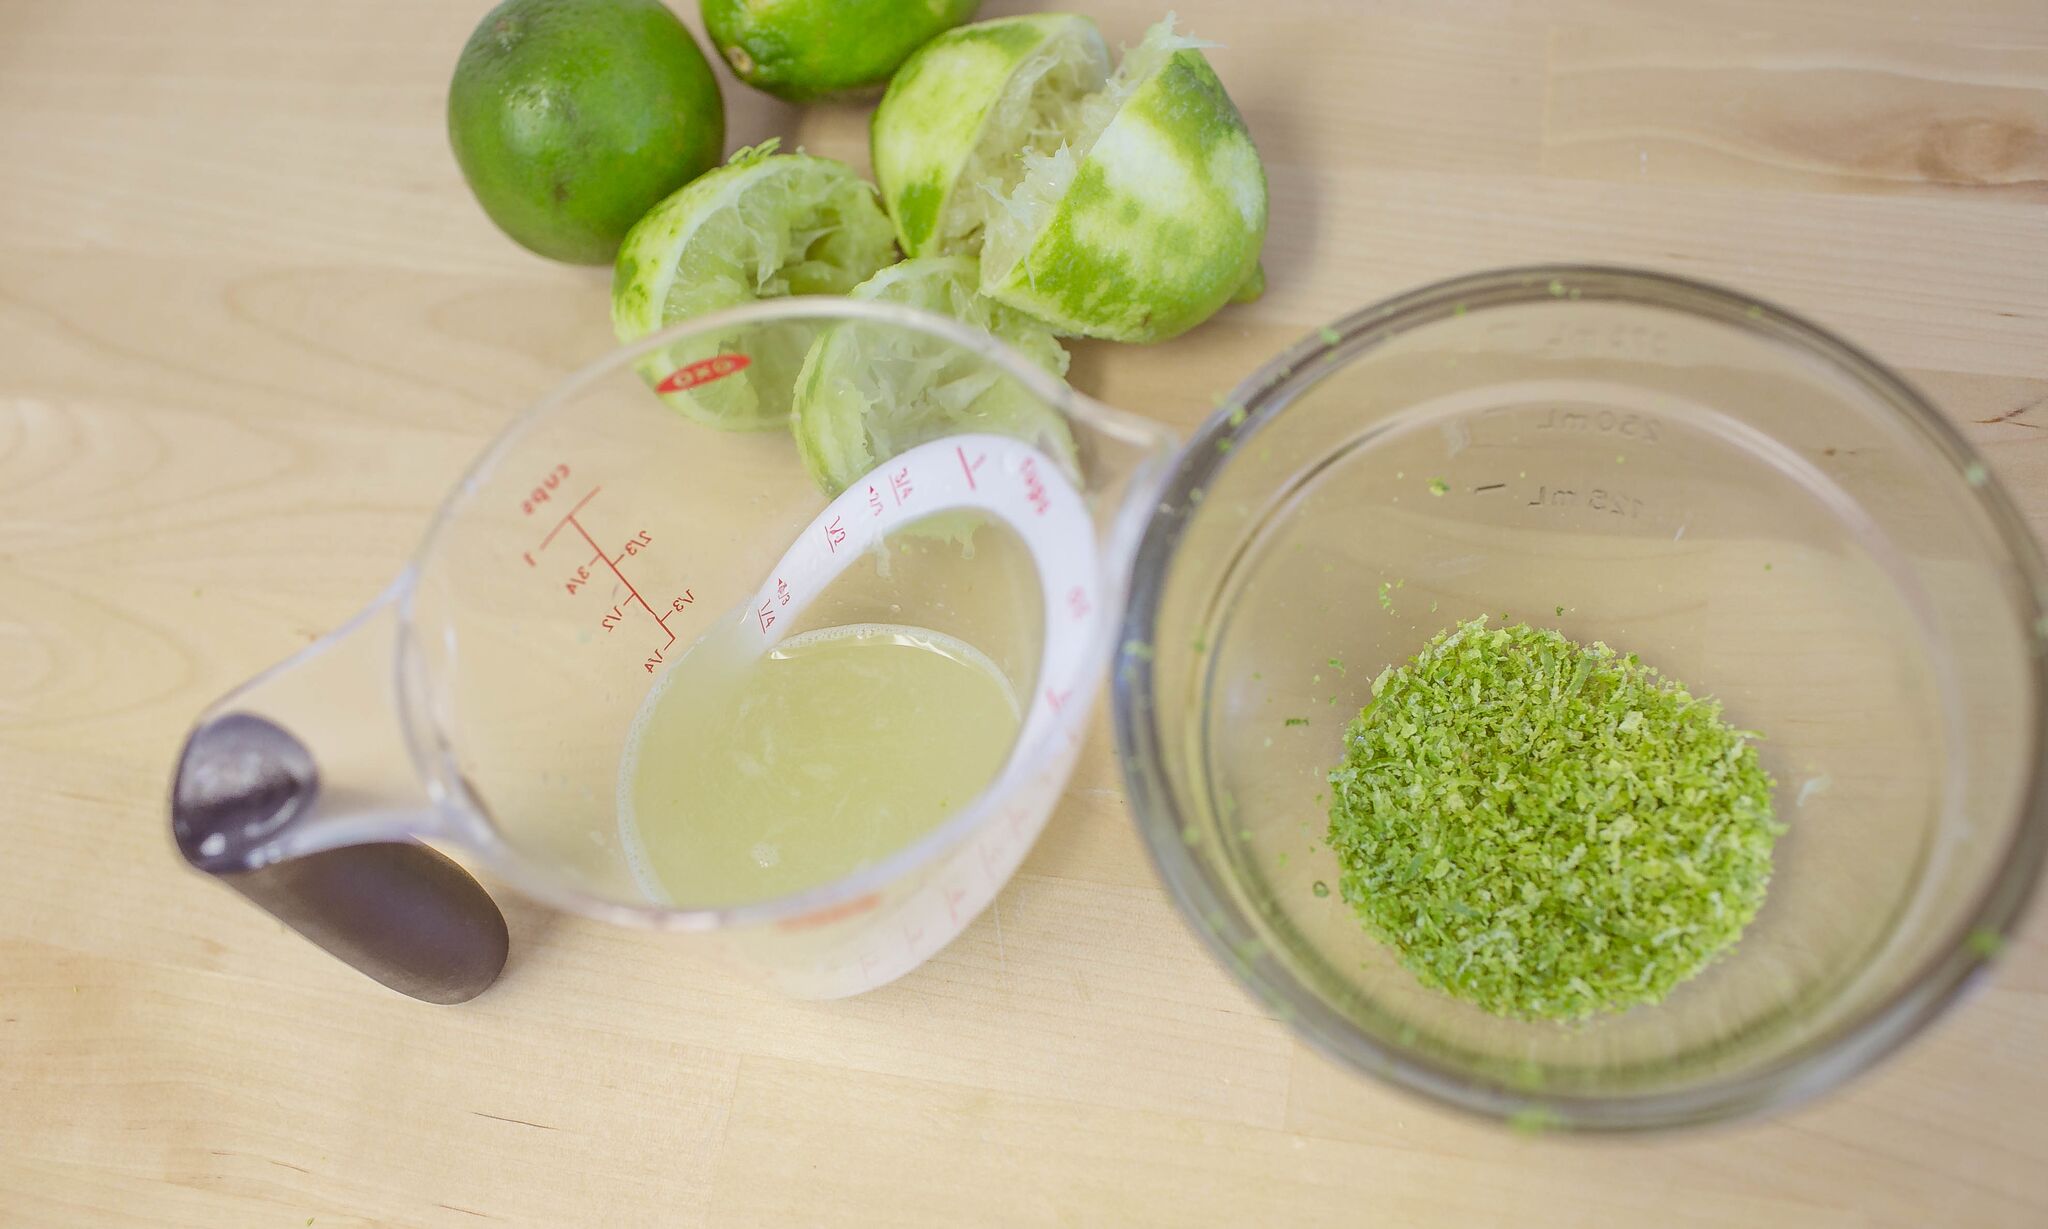 Zest limes and add zest to medium size bowl, then juice and set aside.